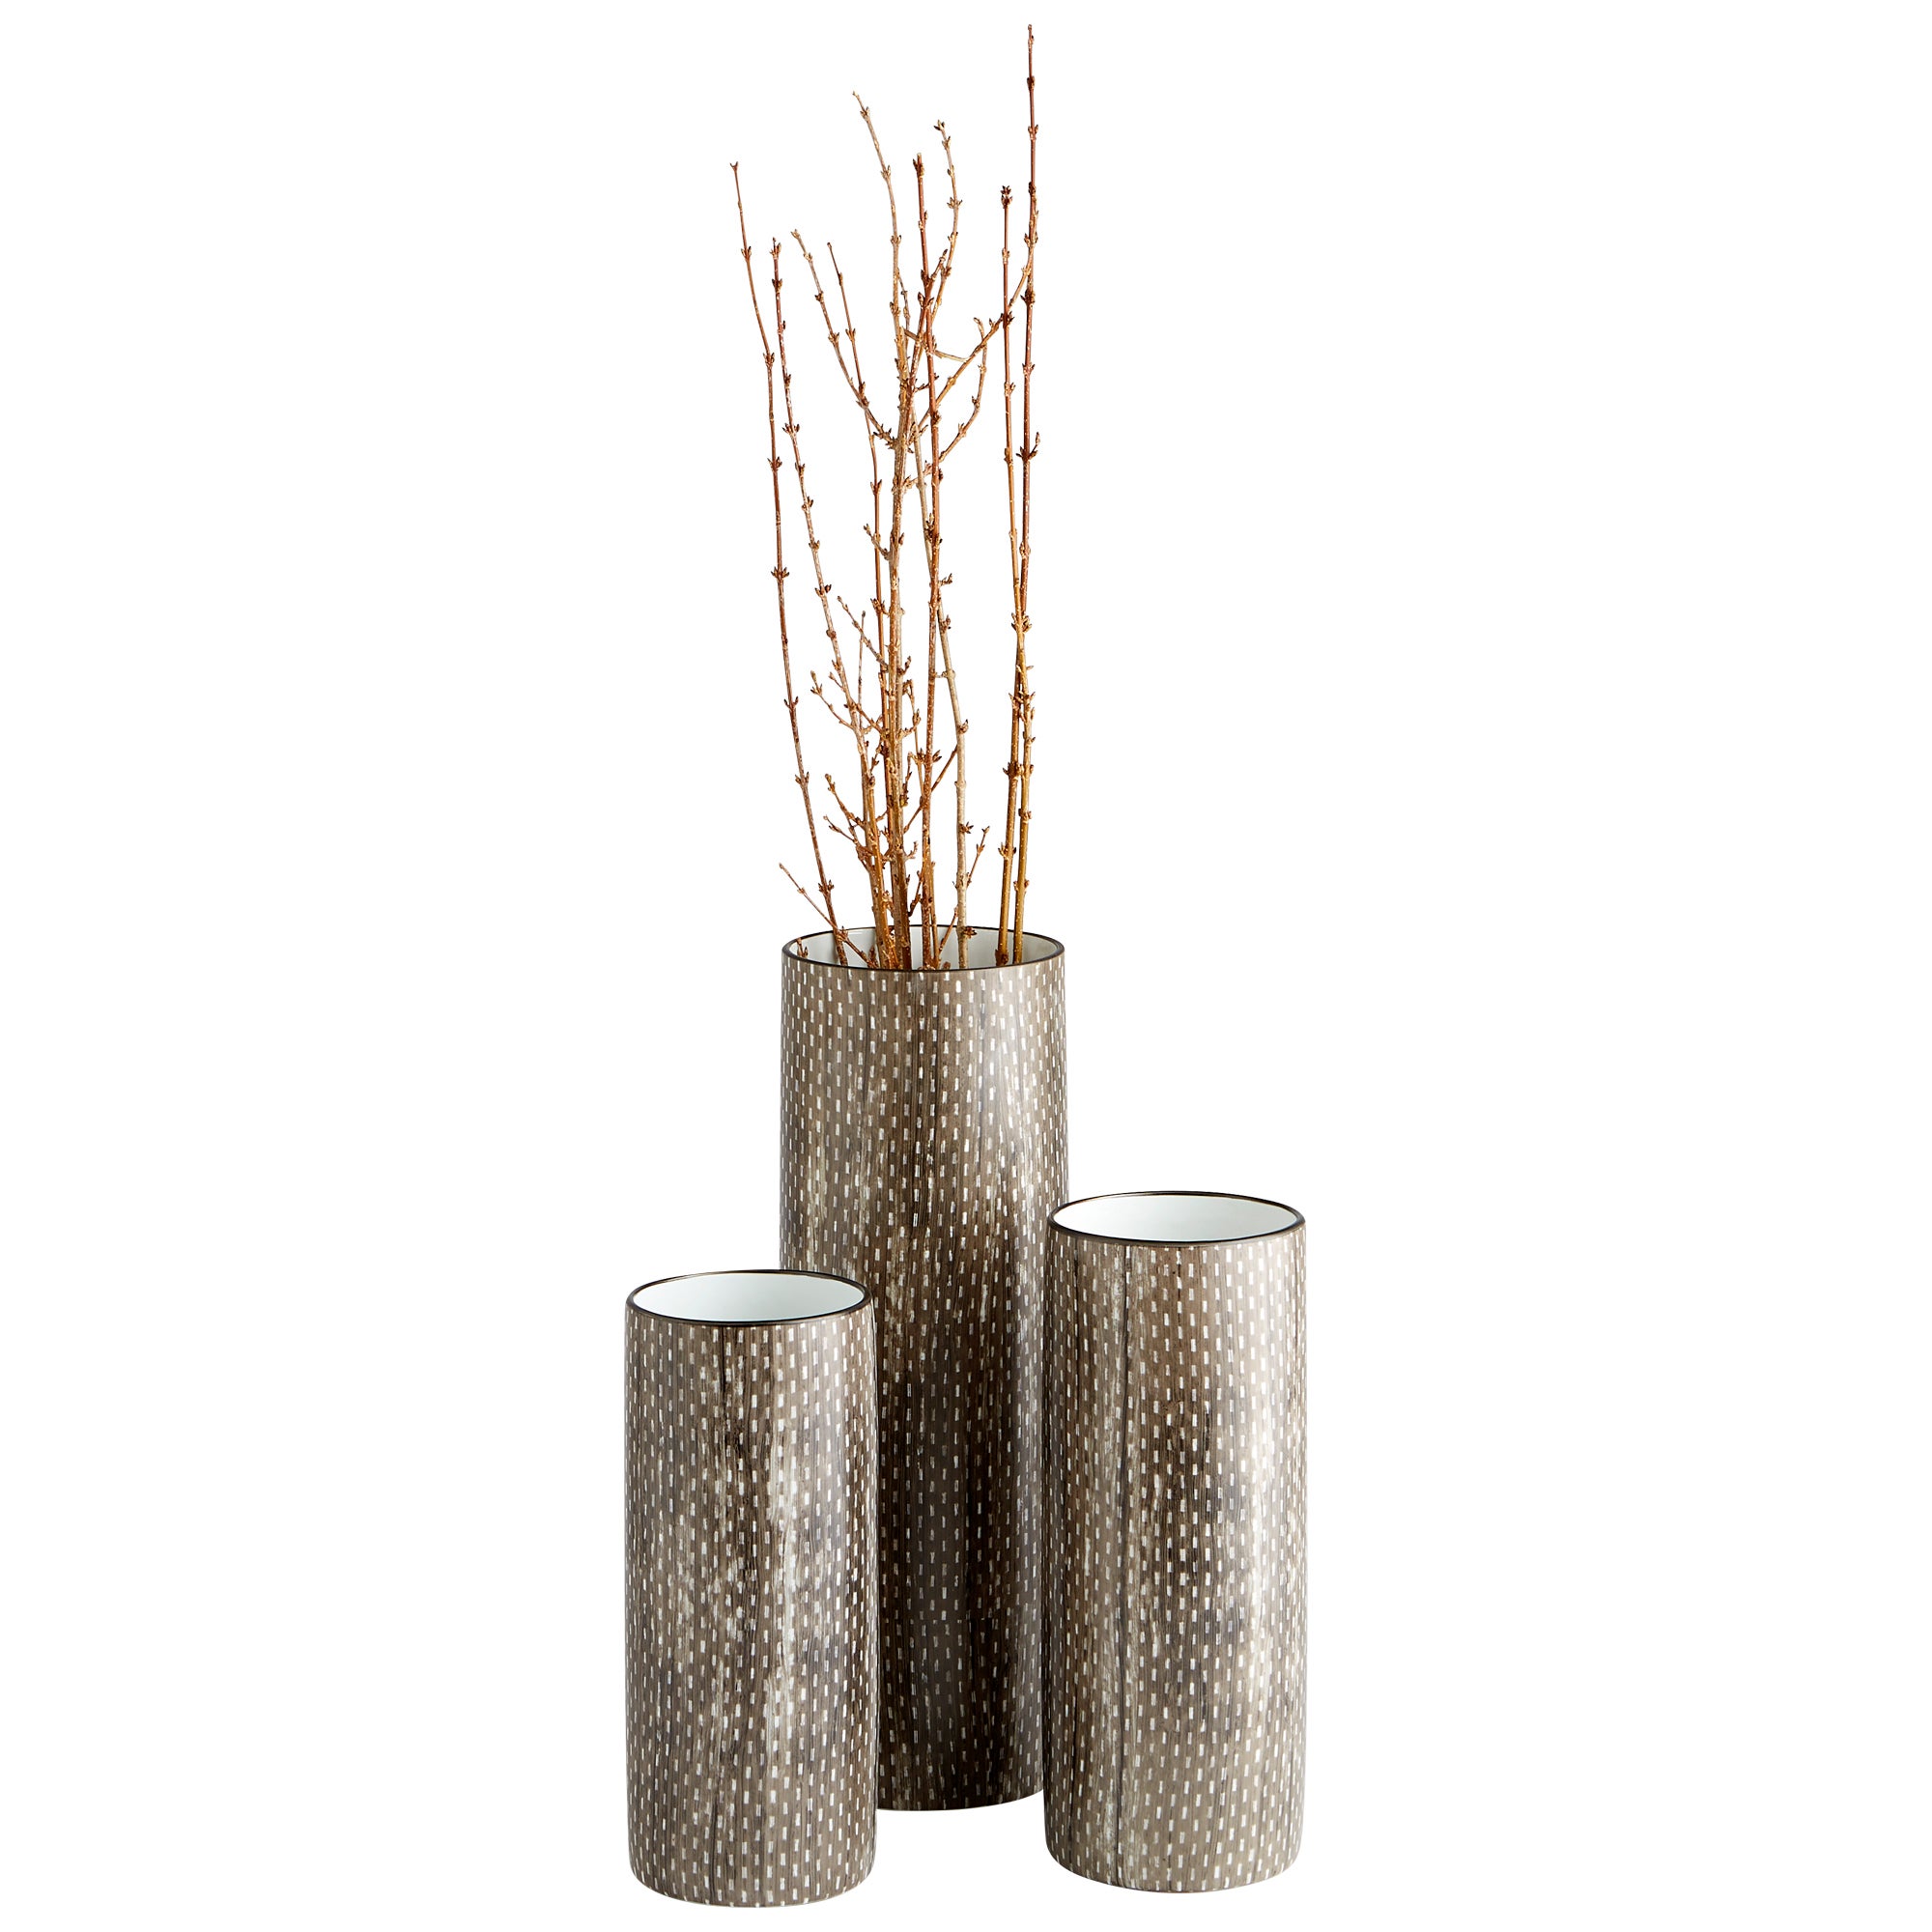 Atacama Vase | Thatched Sienna - Small - vases and planters | cyan